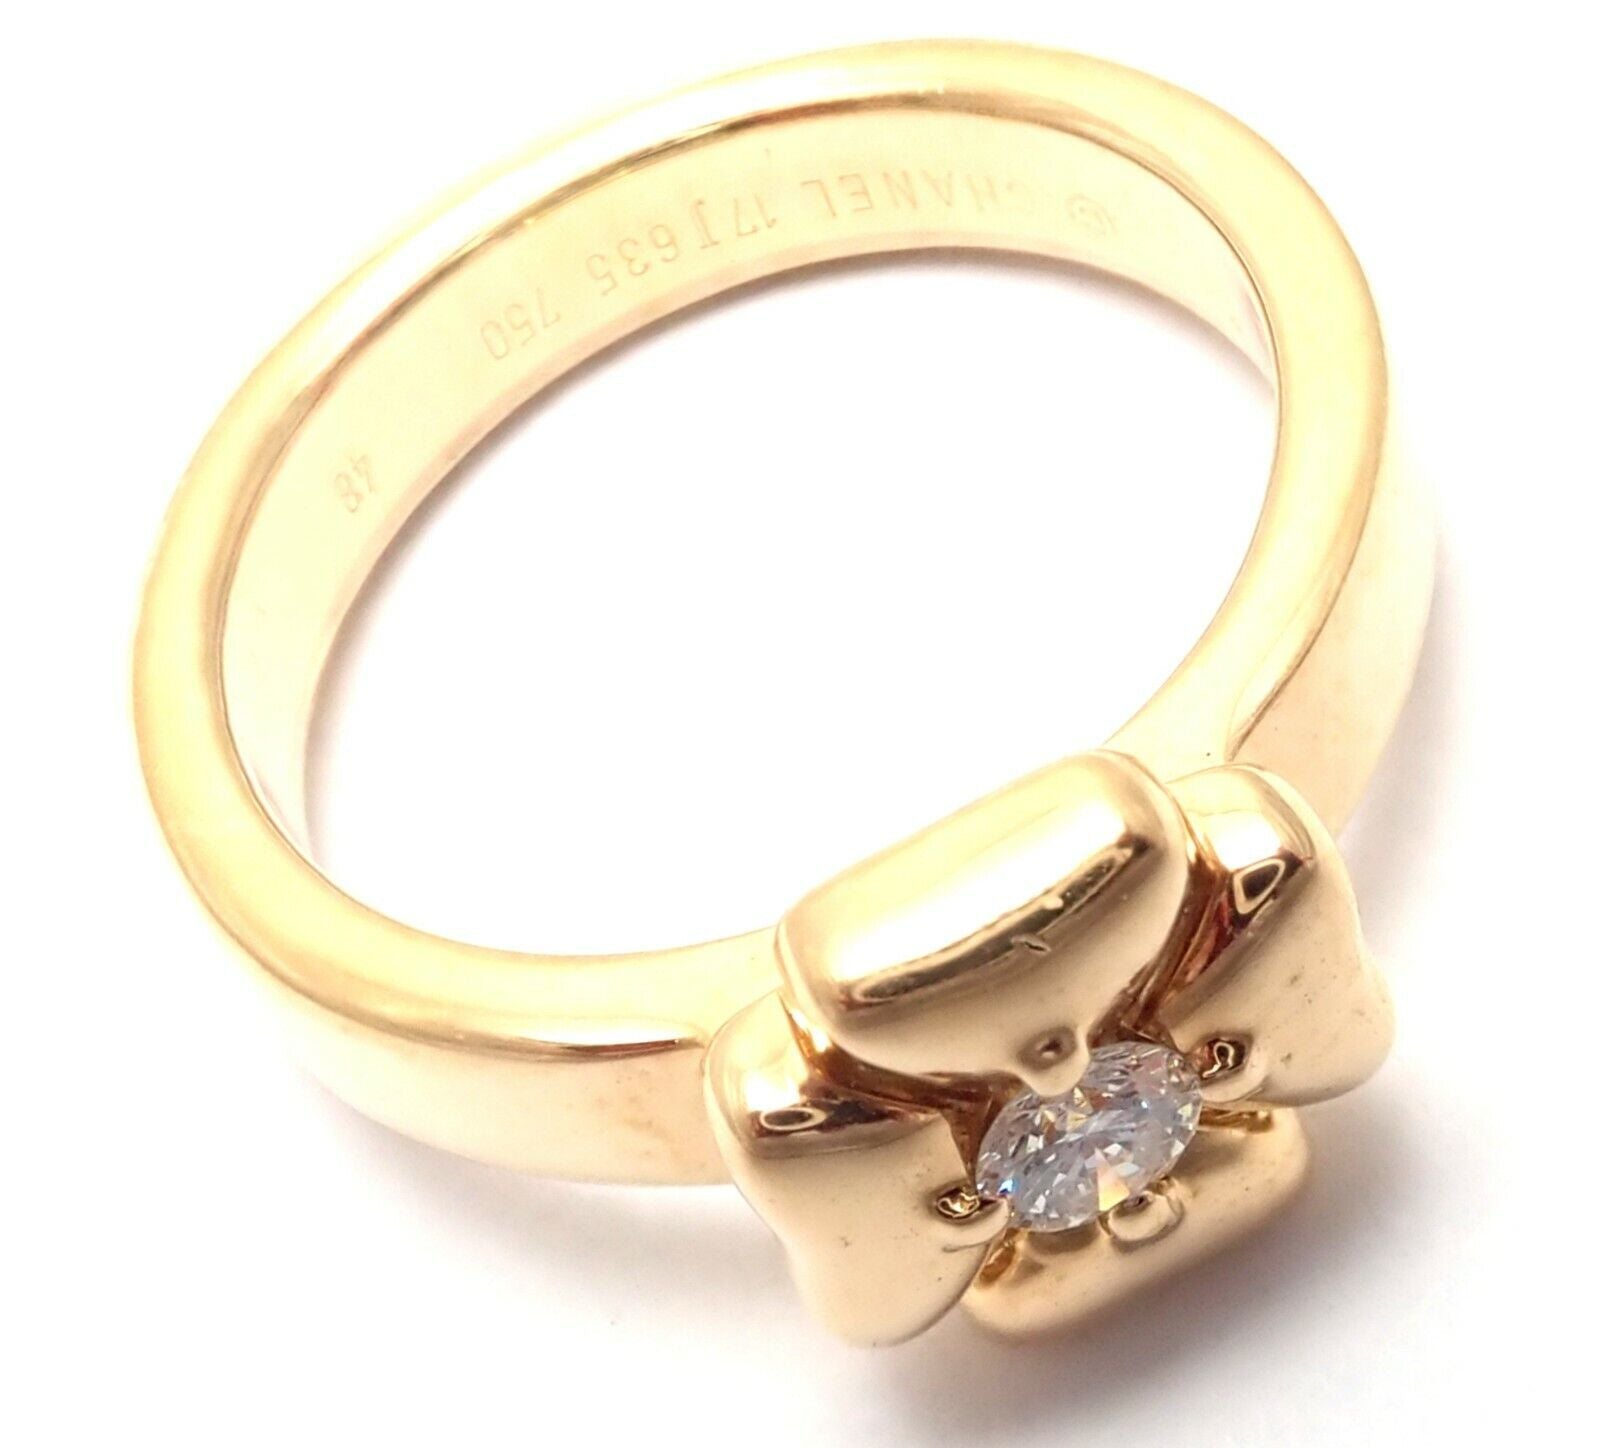 Exquisite and Lucky! Chanel 18K Yellow Gold Diamond Four Leaf Clover Ring.